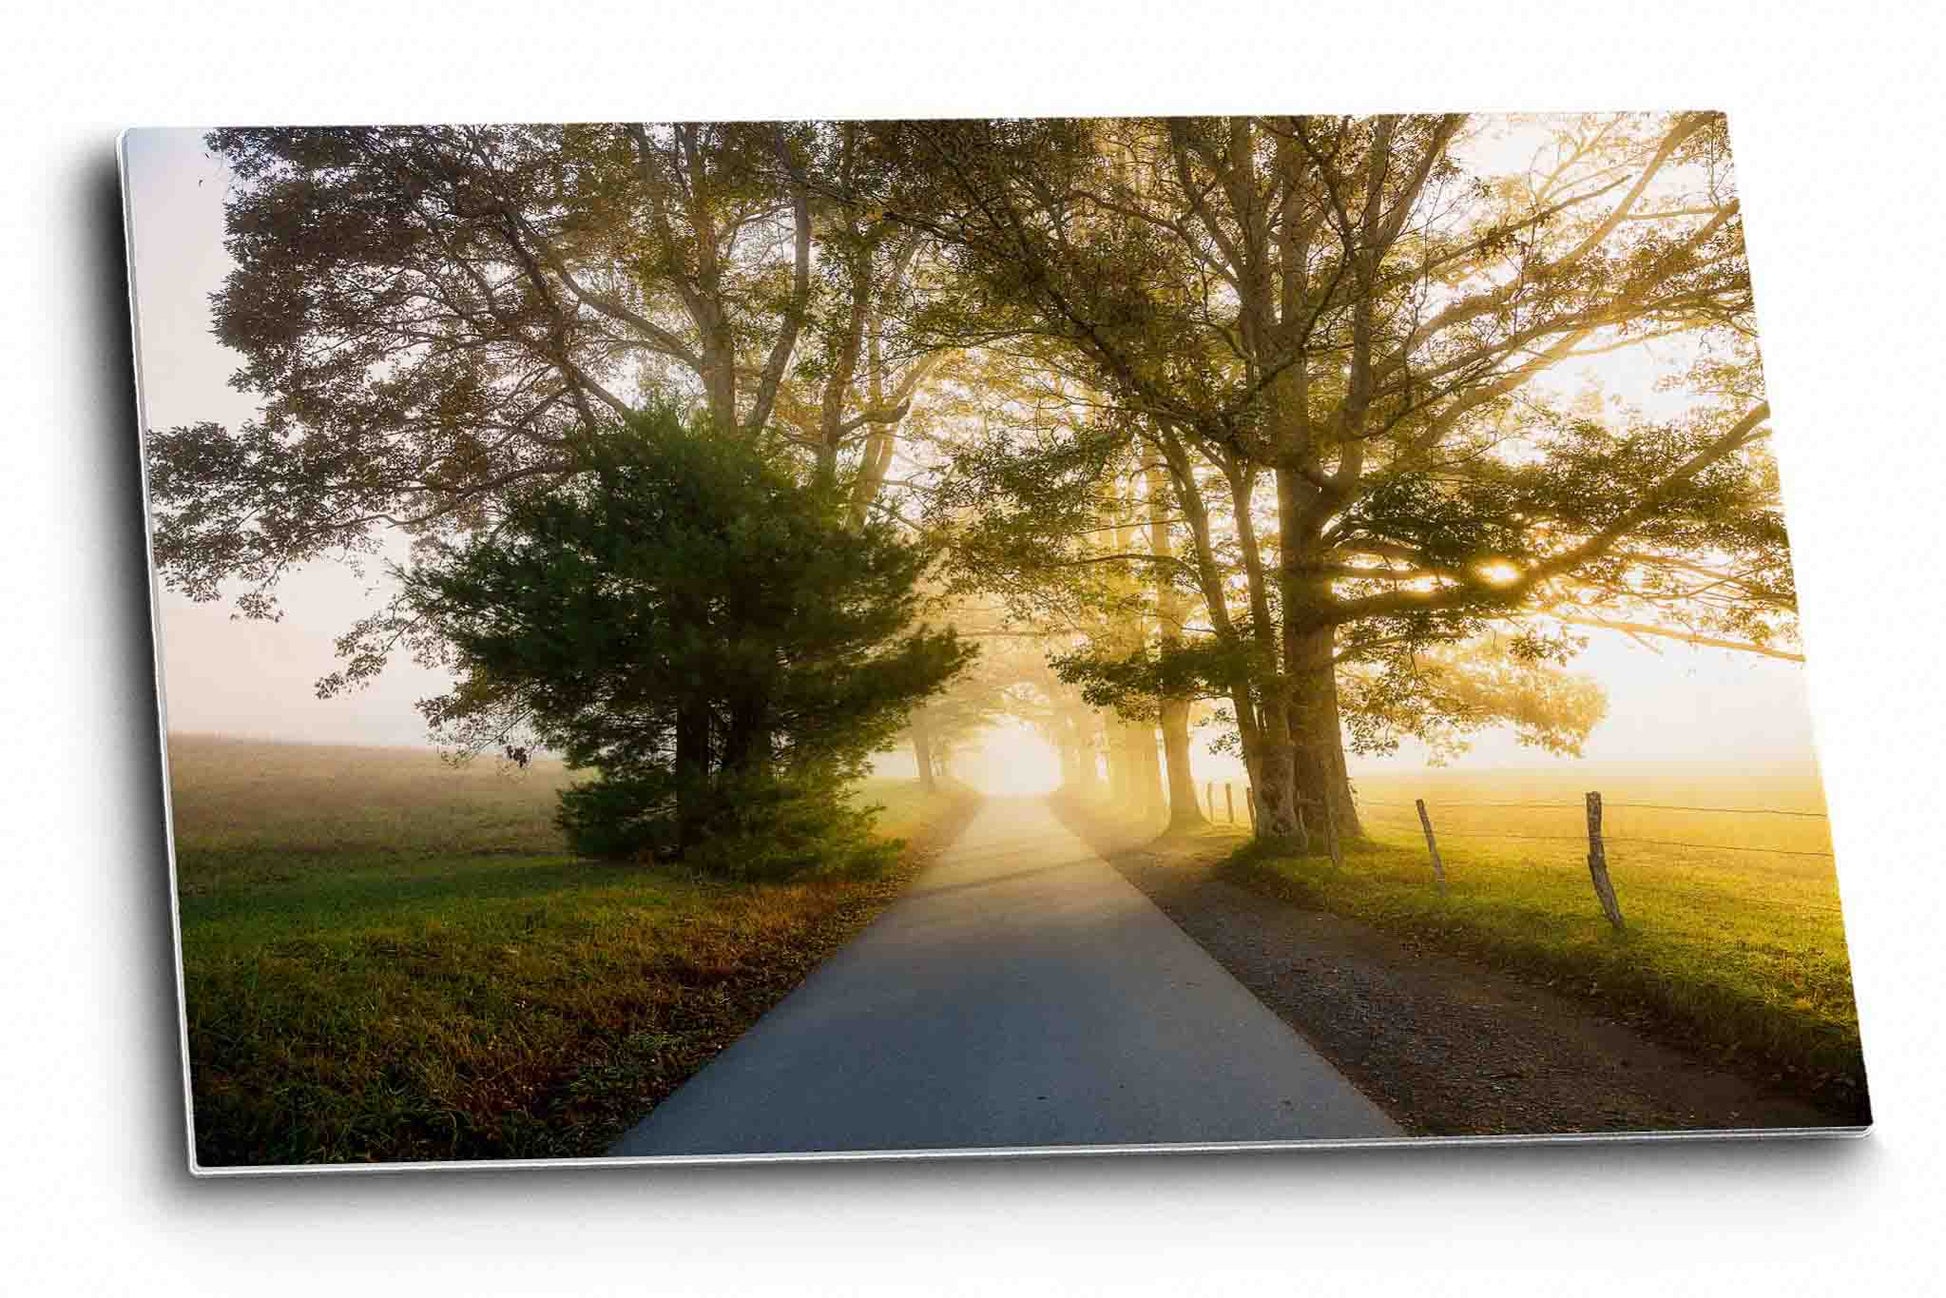 Ethereal metal print on aluminum of a road leading through sunlit fog and trees on an autumn morning along Cades Cove Loop in the Great Smoky Mountains of Tennessee by Sean Ramsey of Southern Plains Photography.